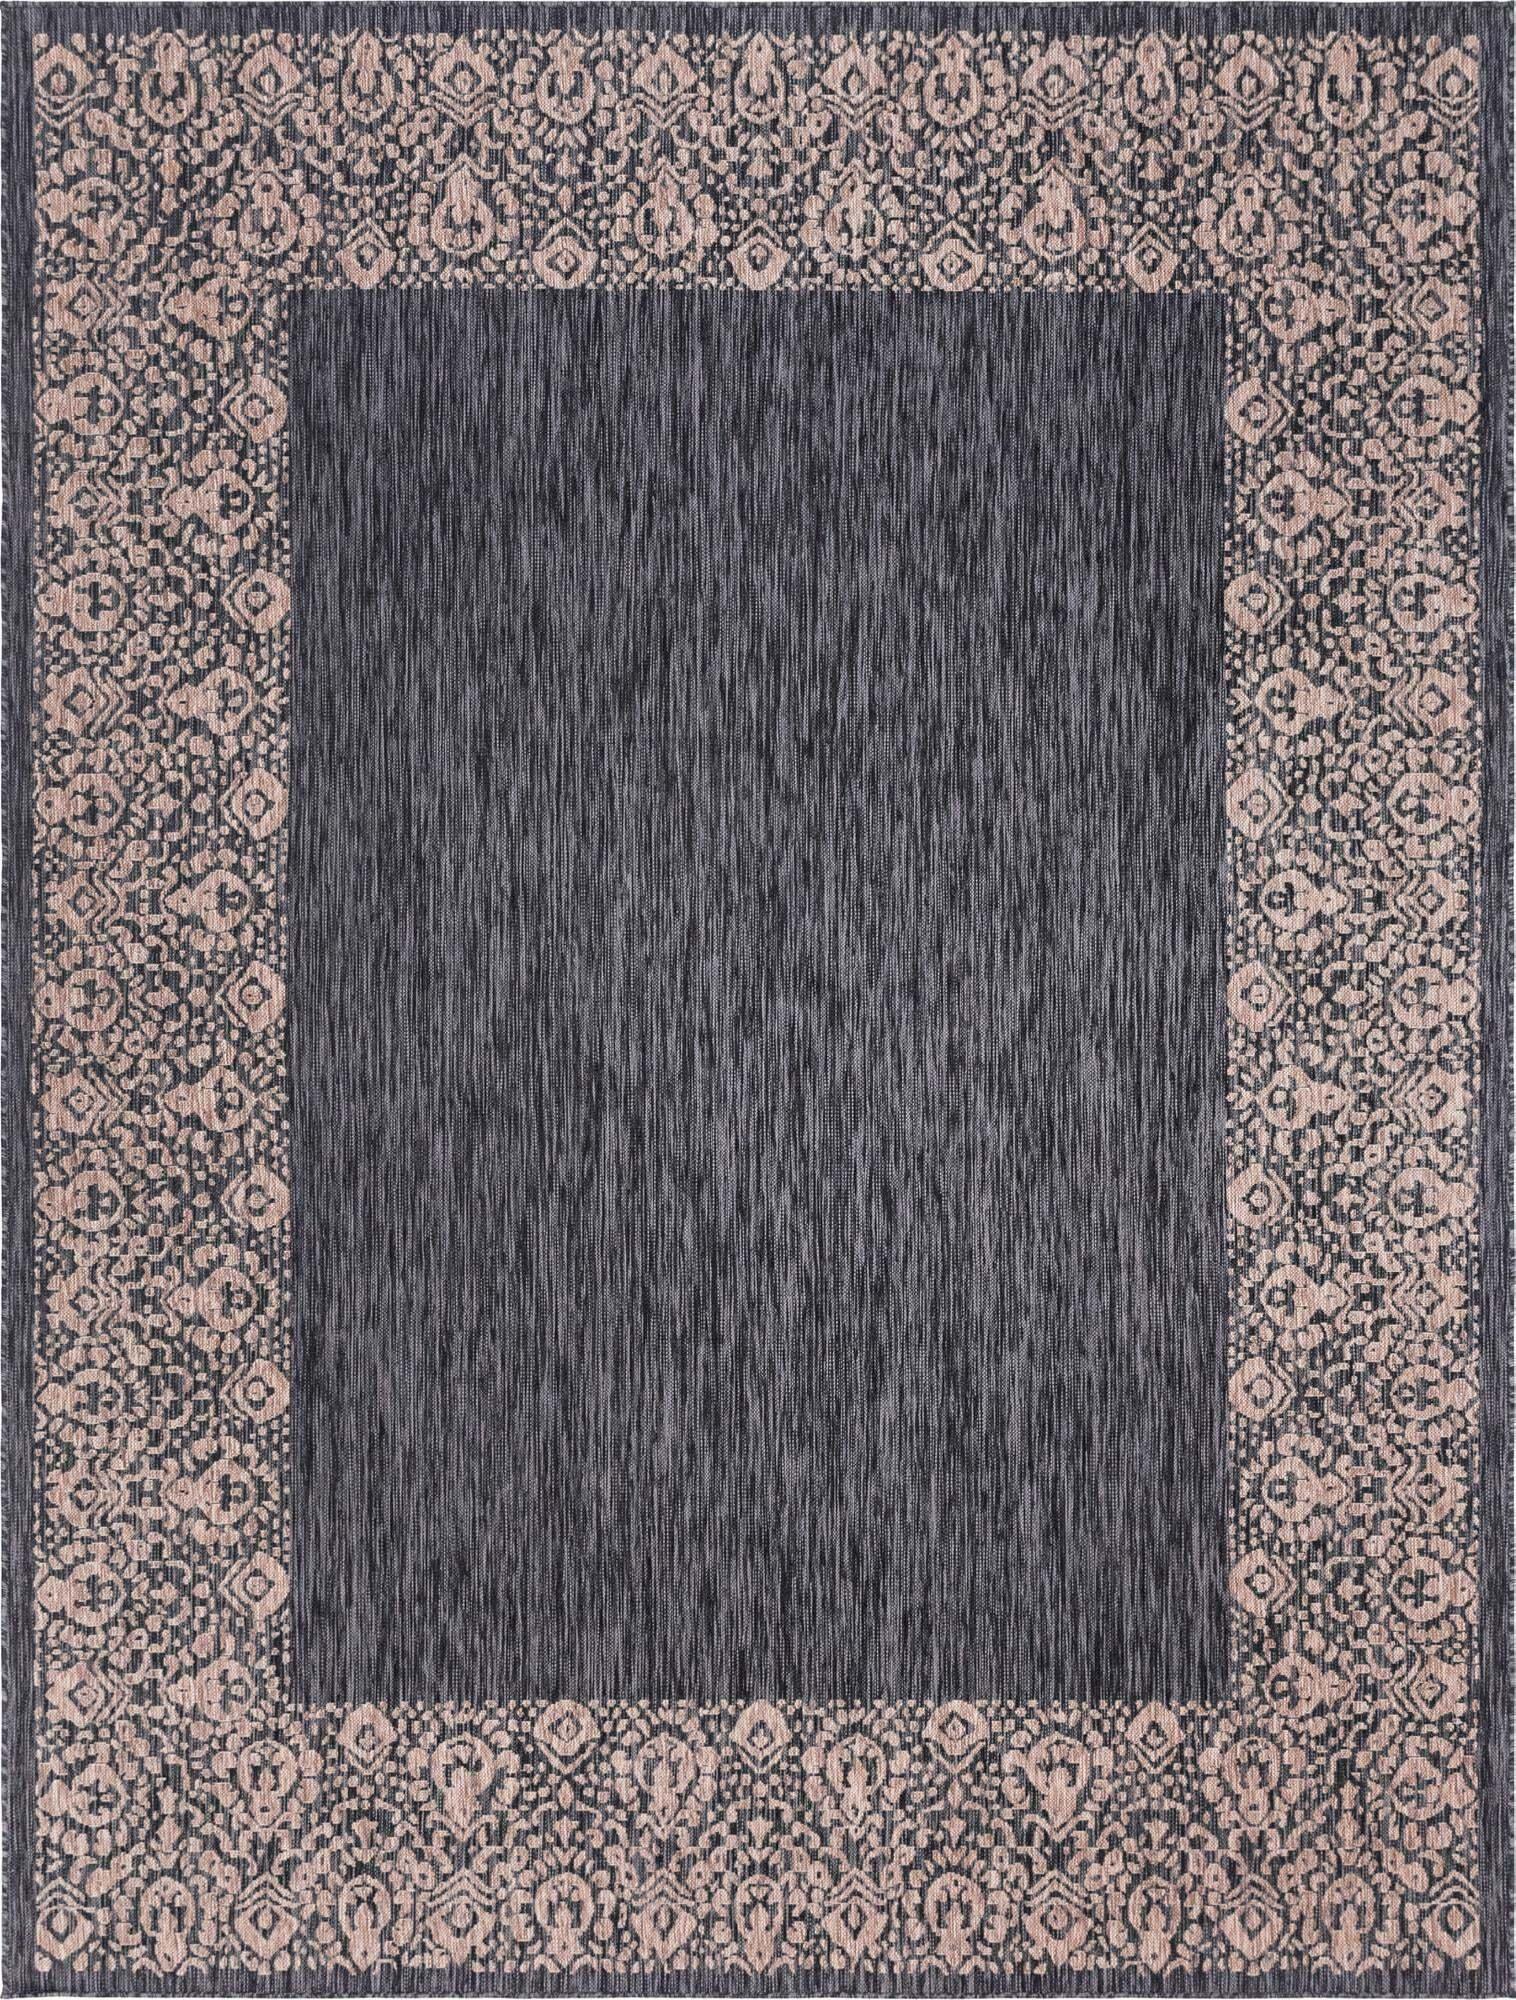 https://cdn.shopify.com/s/files/1/0458/7513/4624/files/outdoor-border-floral-rectangular-9x12-rug-charcoal-gray-and-beige-unique-loom-casaone-1.jpg?v=1686648579&width=1516